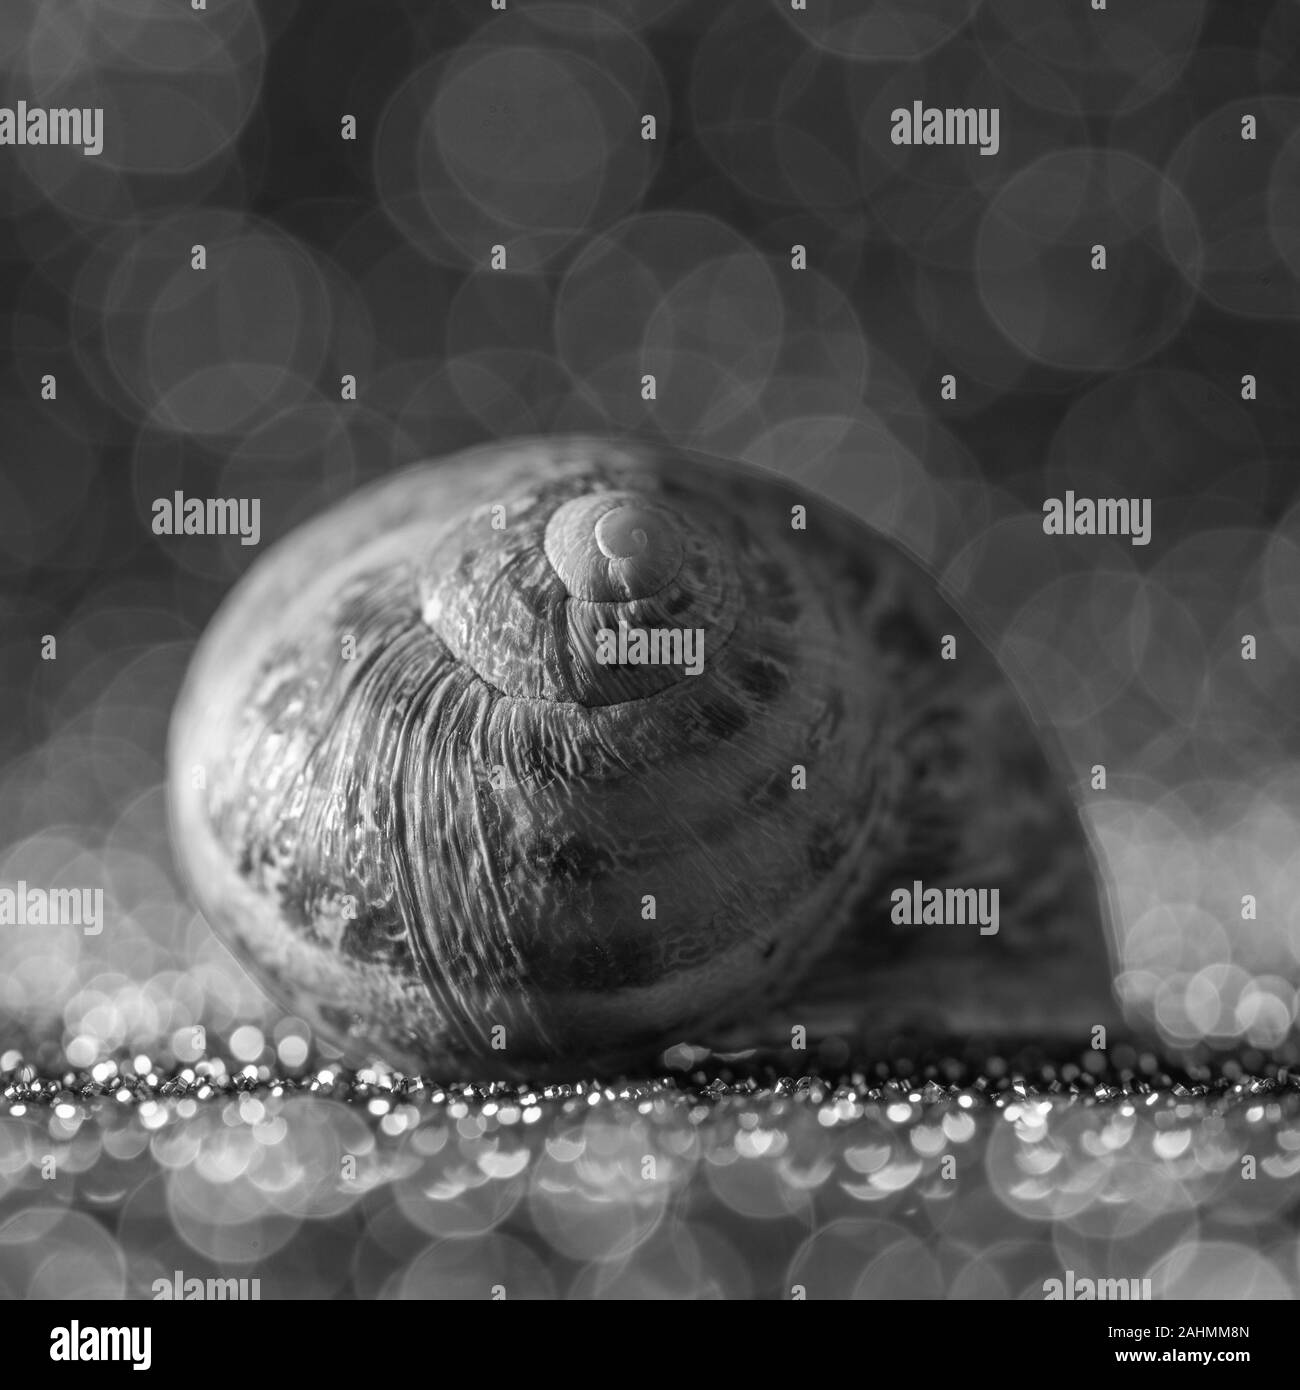 common garden snail shell indoor with fine art photography feel black and white Stock Photo